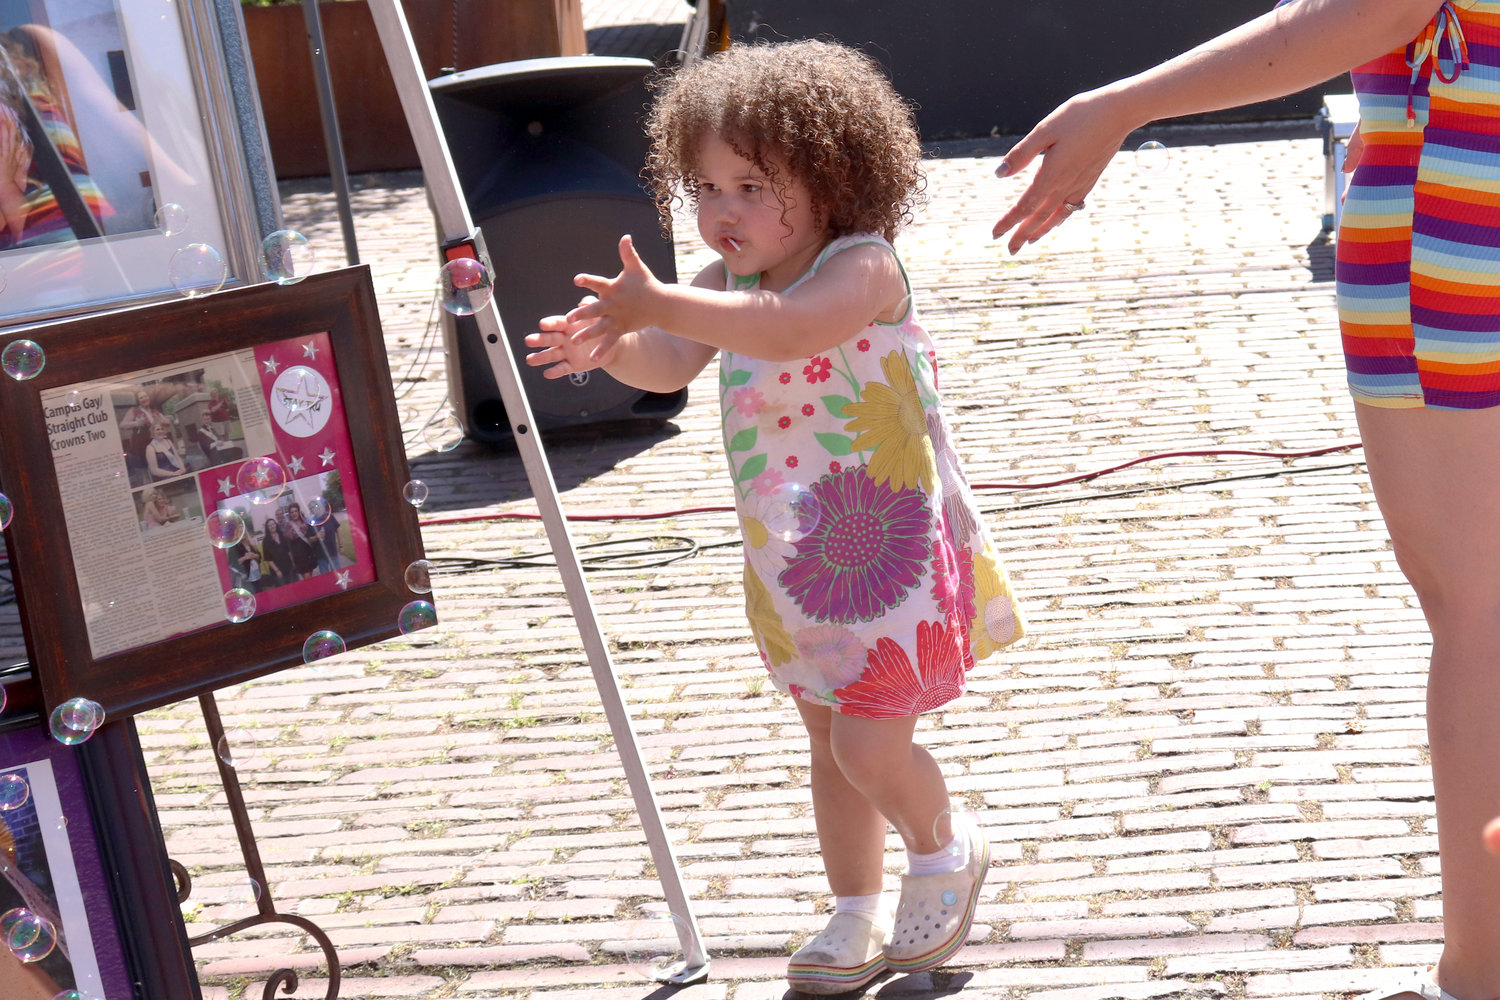 Layla, 1, chases bubbles during Lewis County Pride in Centralia on Saturday.